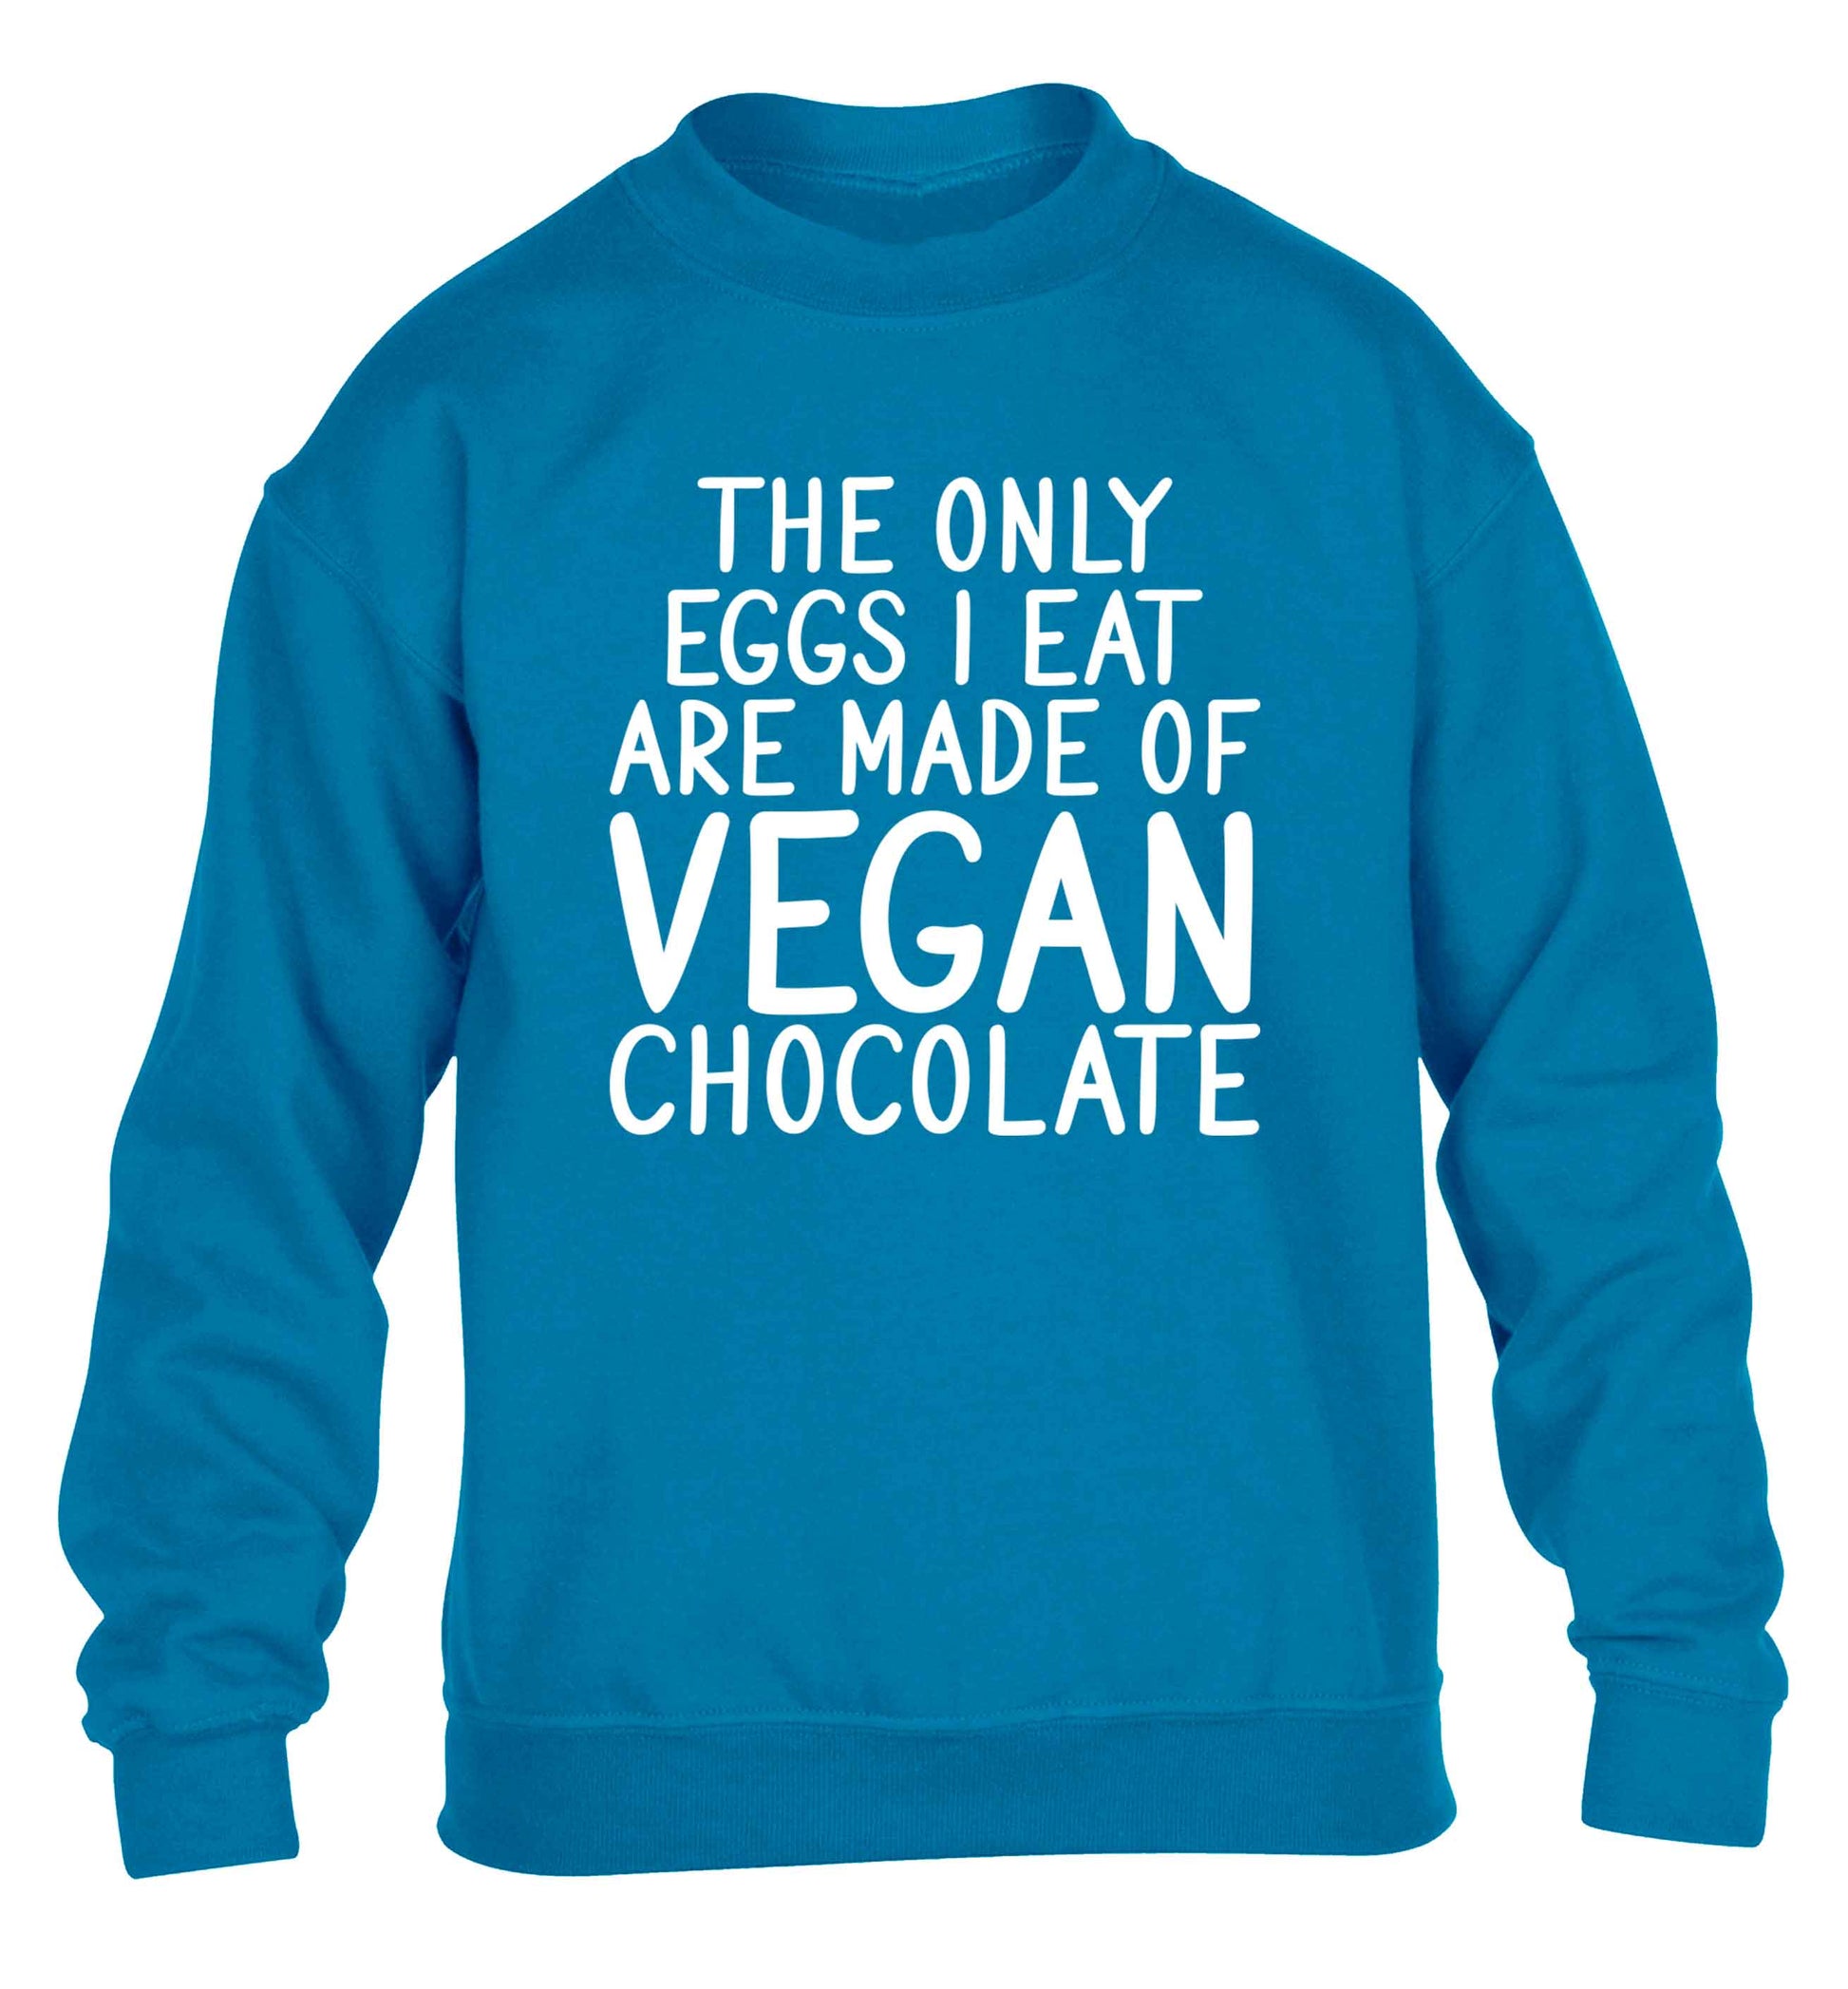 The only eggs I eat are made of vegan chocolate children's blue sweater 12-13 Years